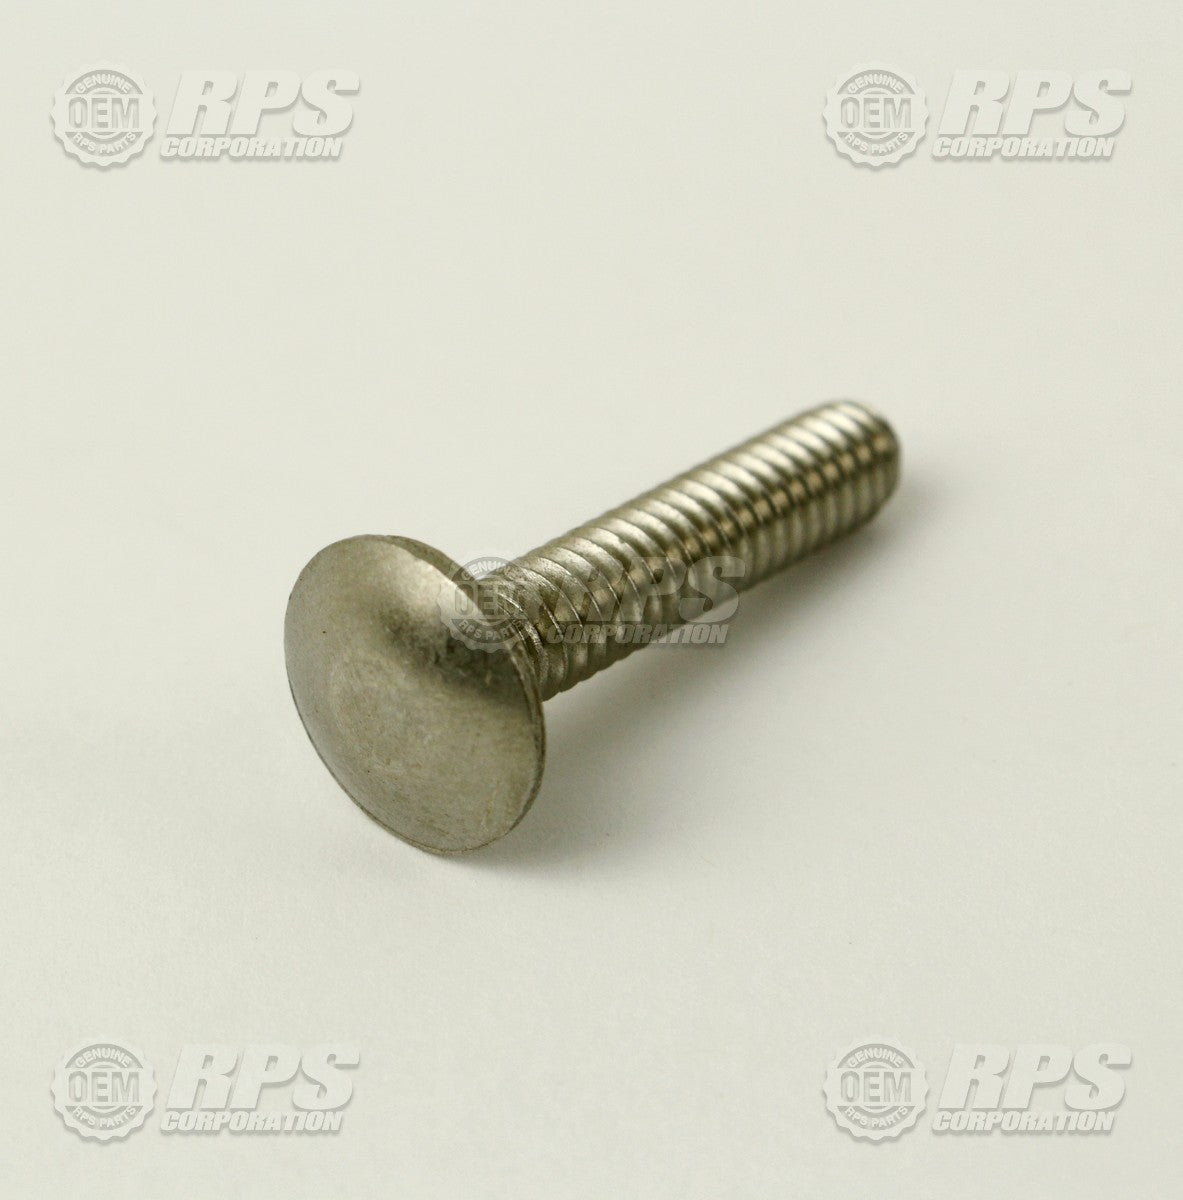 FactoryCat/Tomcat H-74421, Bolt,Carriage,1/4-20x1-1/4" Stainless